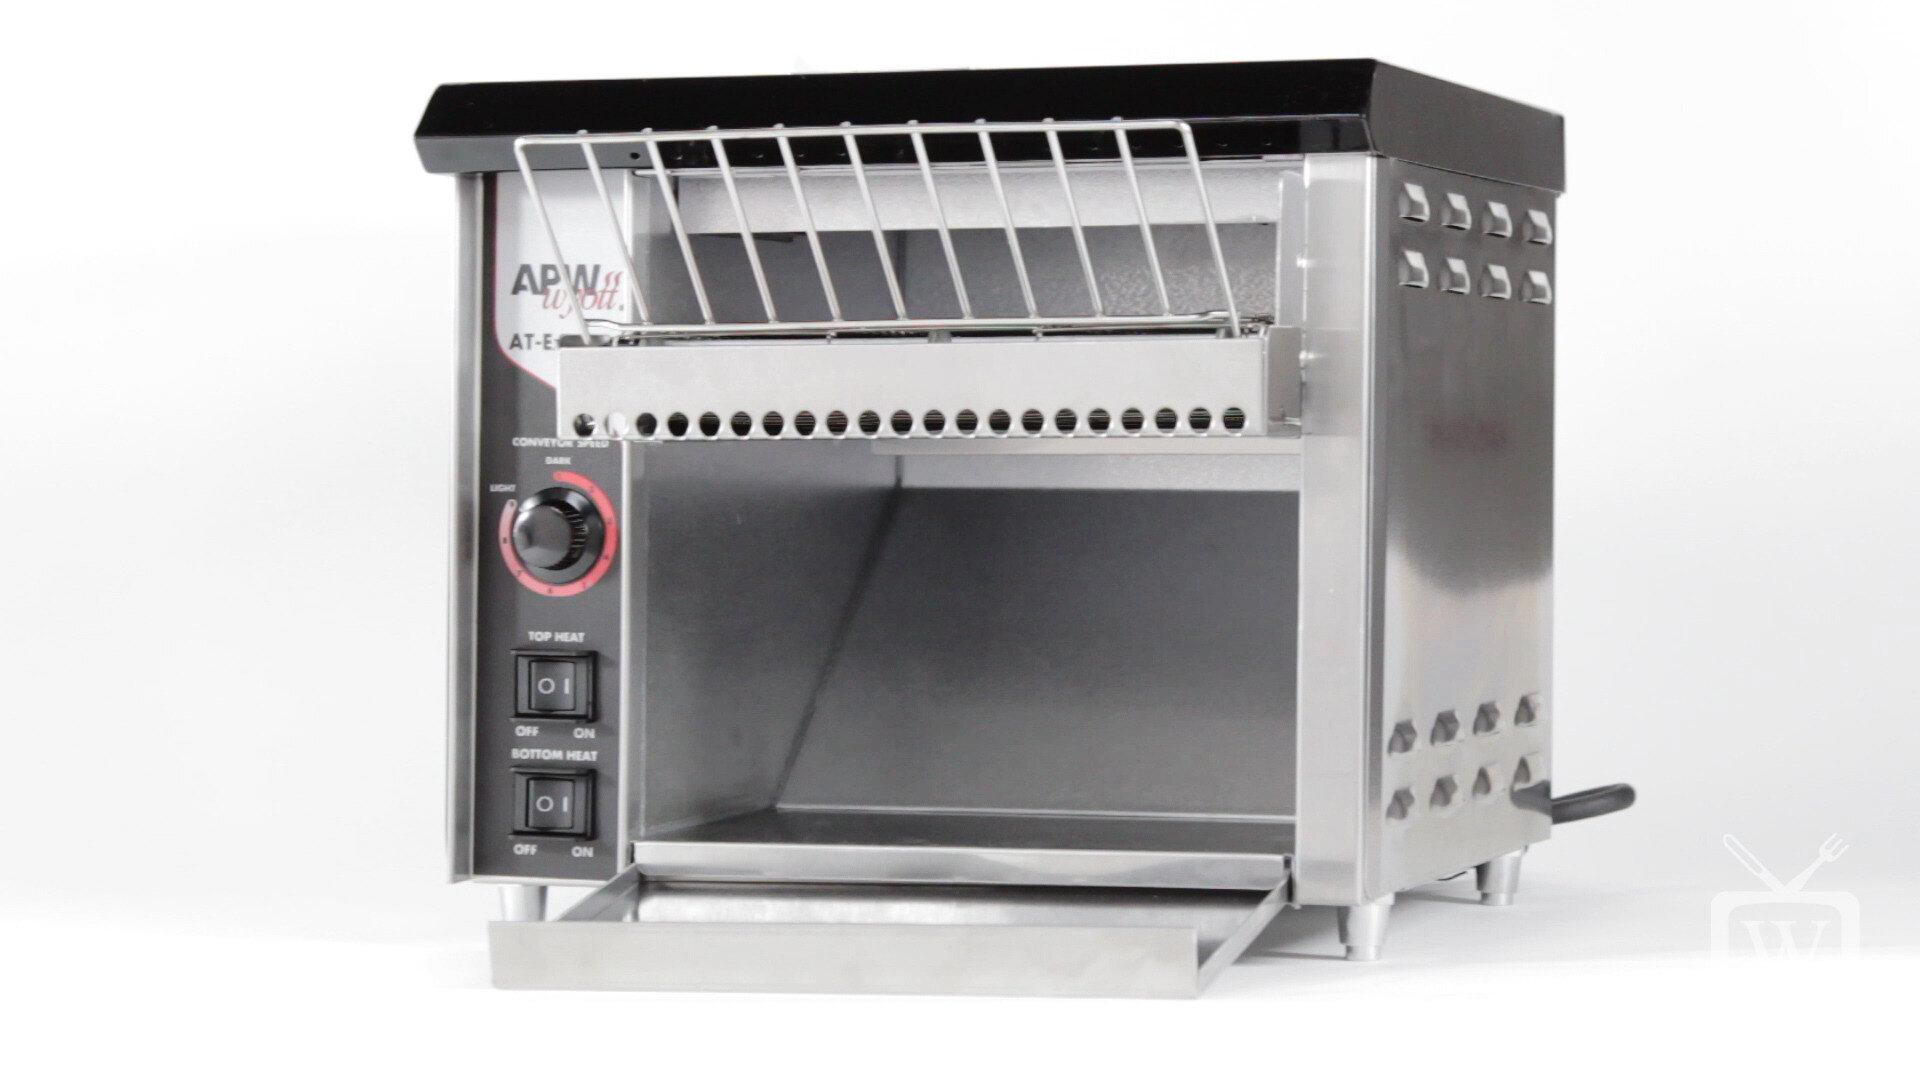 APW Wyott AT Express Commercial Conveyor Toaster 93300000 Stainless 120V 